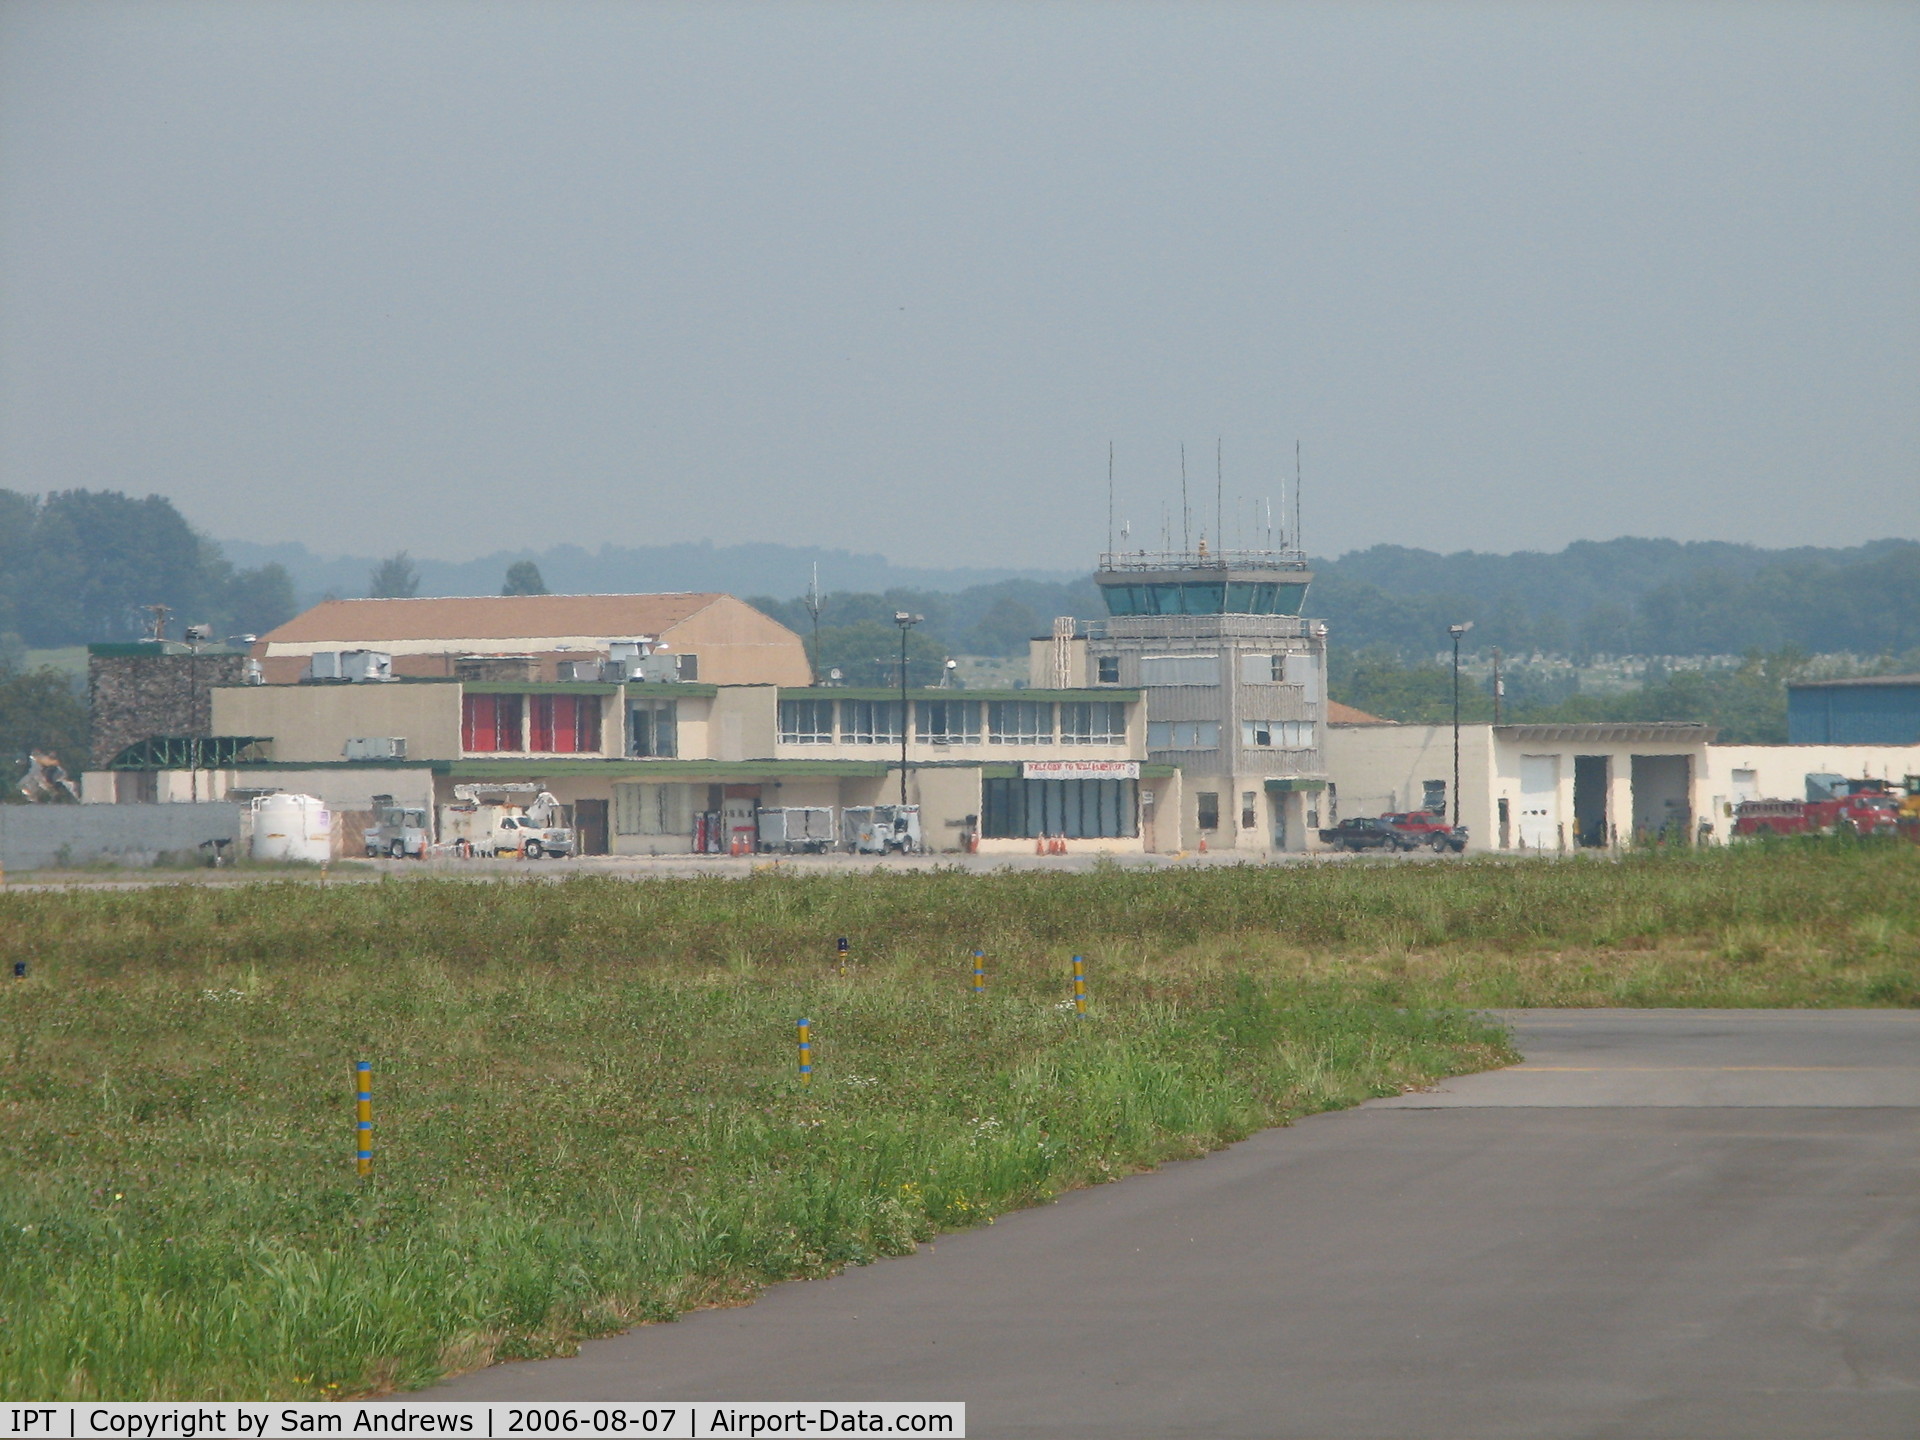 Williamsport Regional Airport (IPT) - A better picture of the terminal, tower and awesome restaurant.